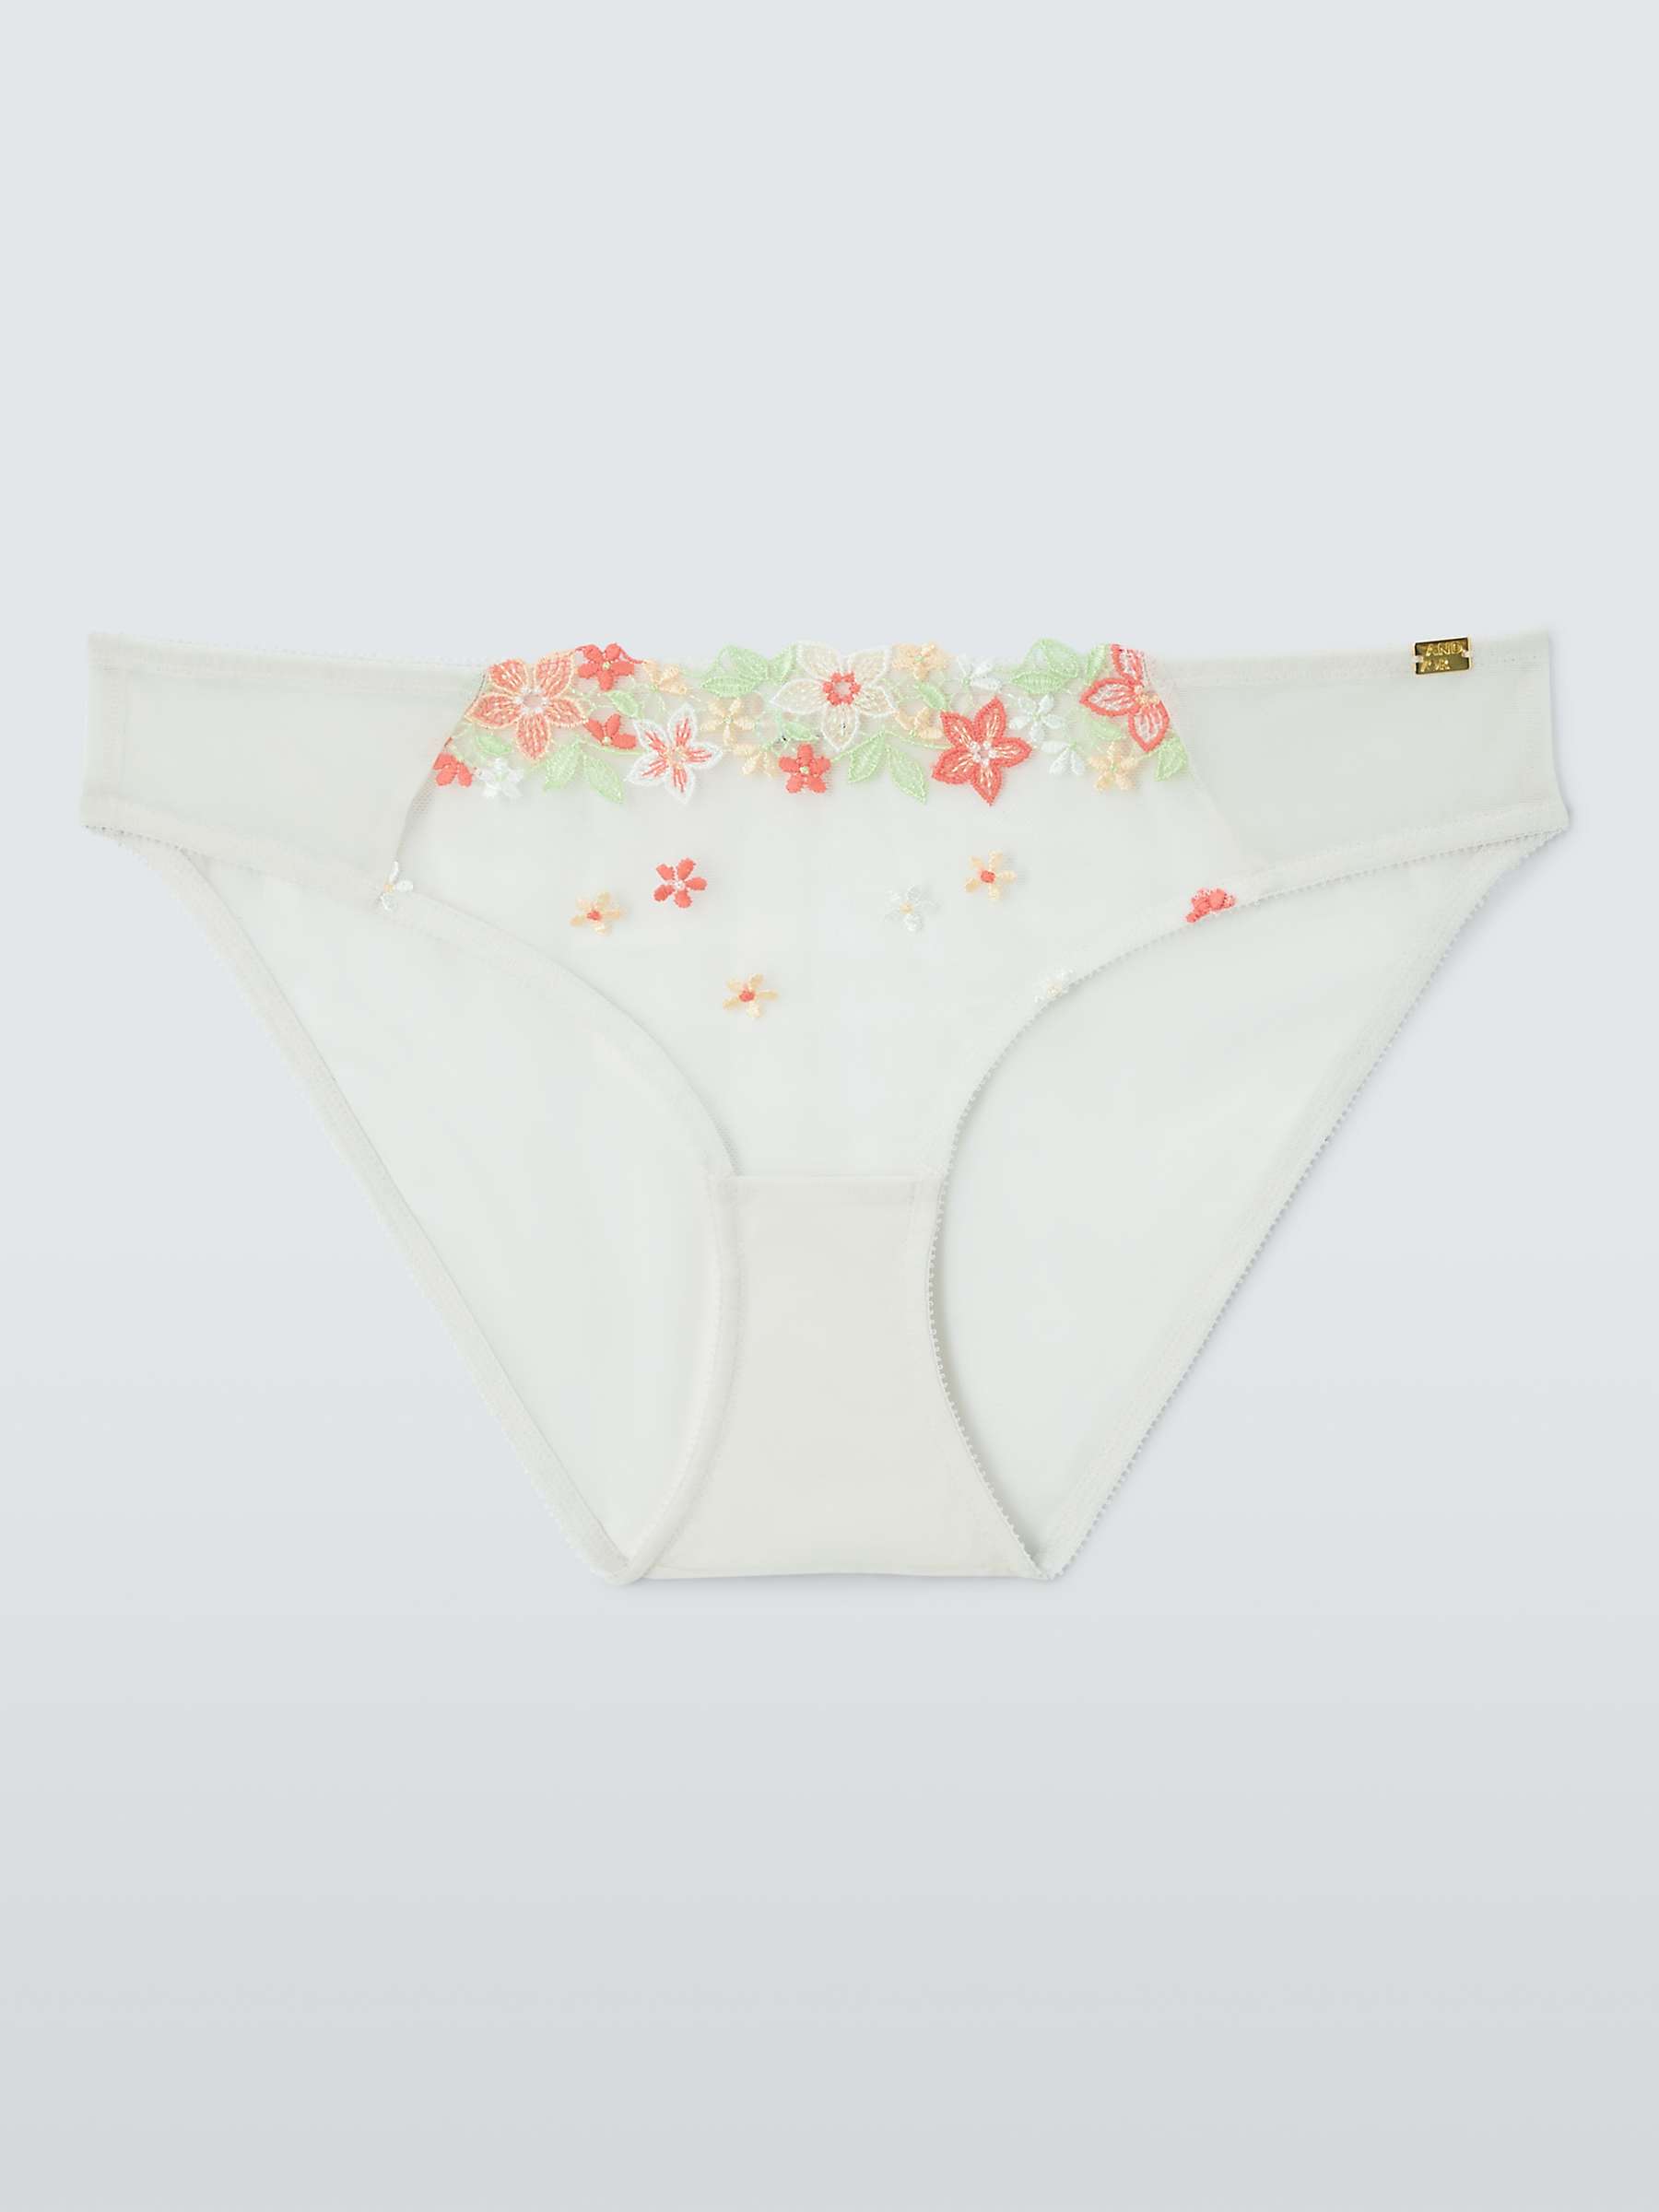 Buy AND/OR Kiki Briefs, White/Multi Online at johnlewis.com